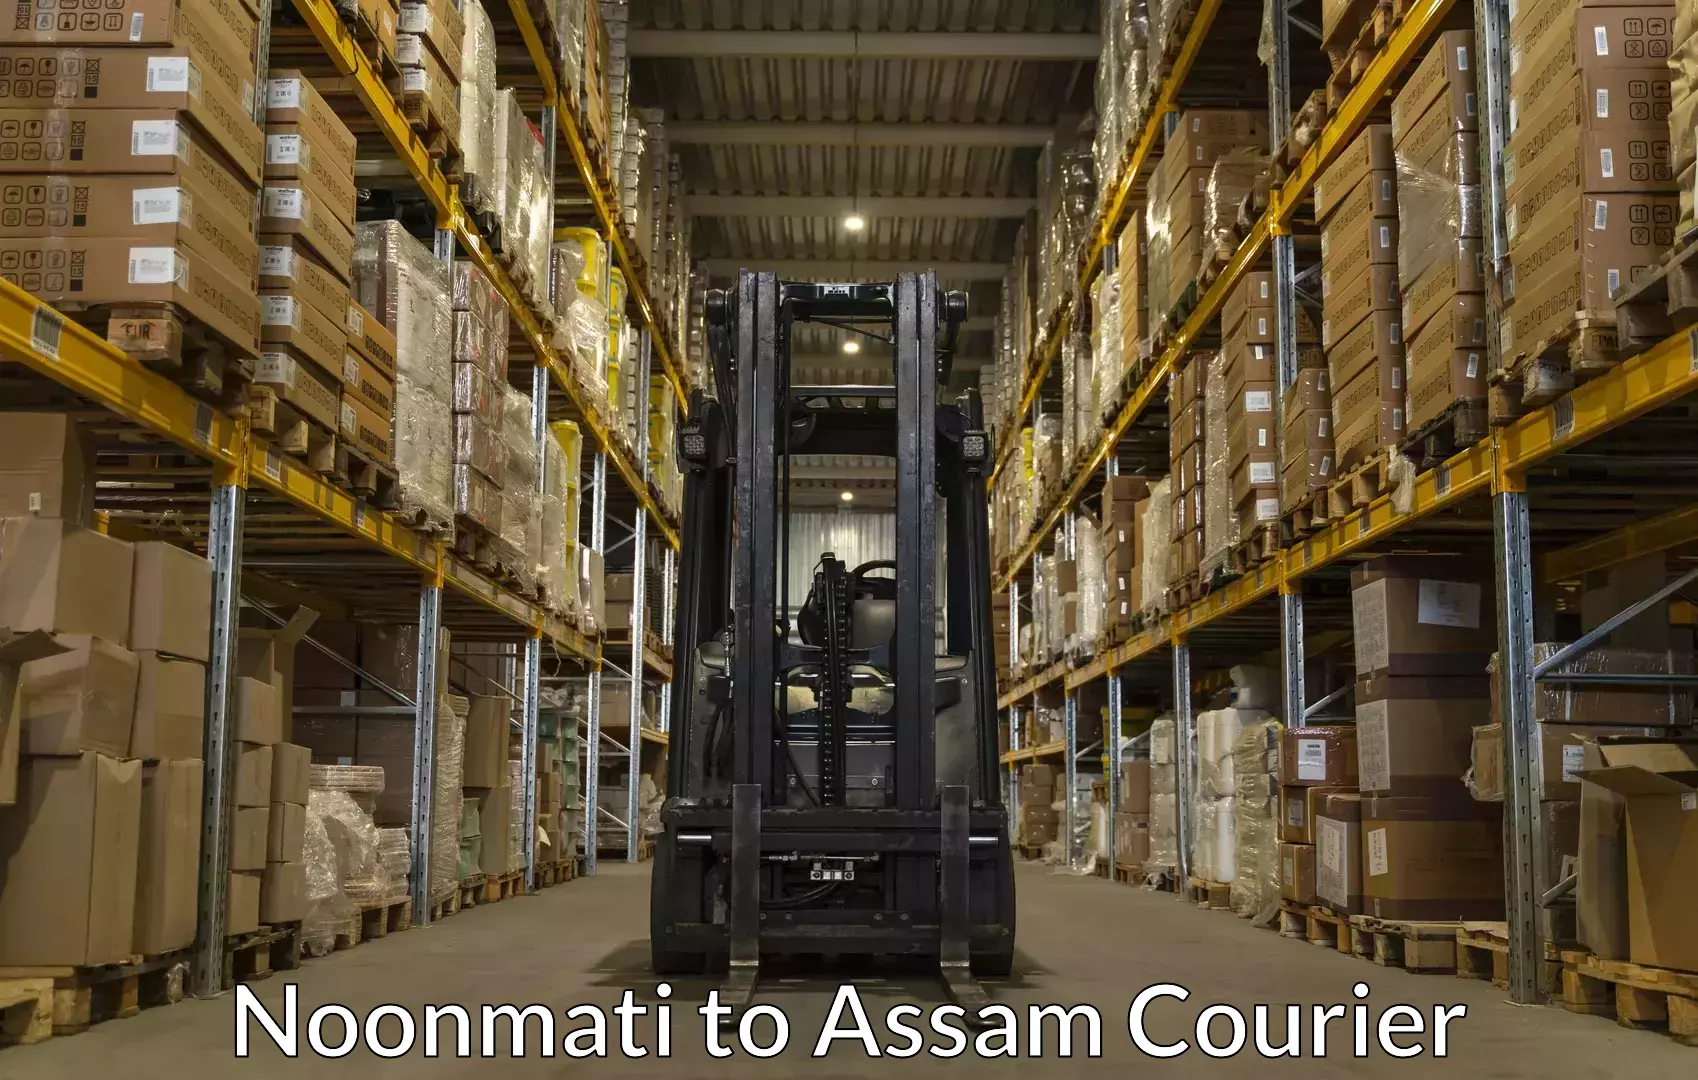 Luggage shipment processing Noonmati to Assam